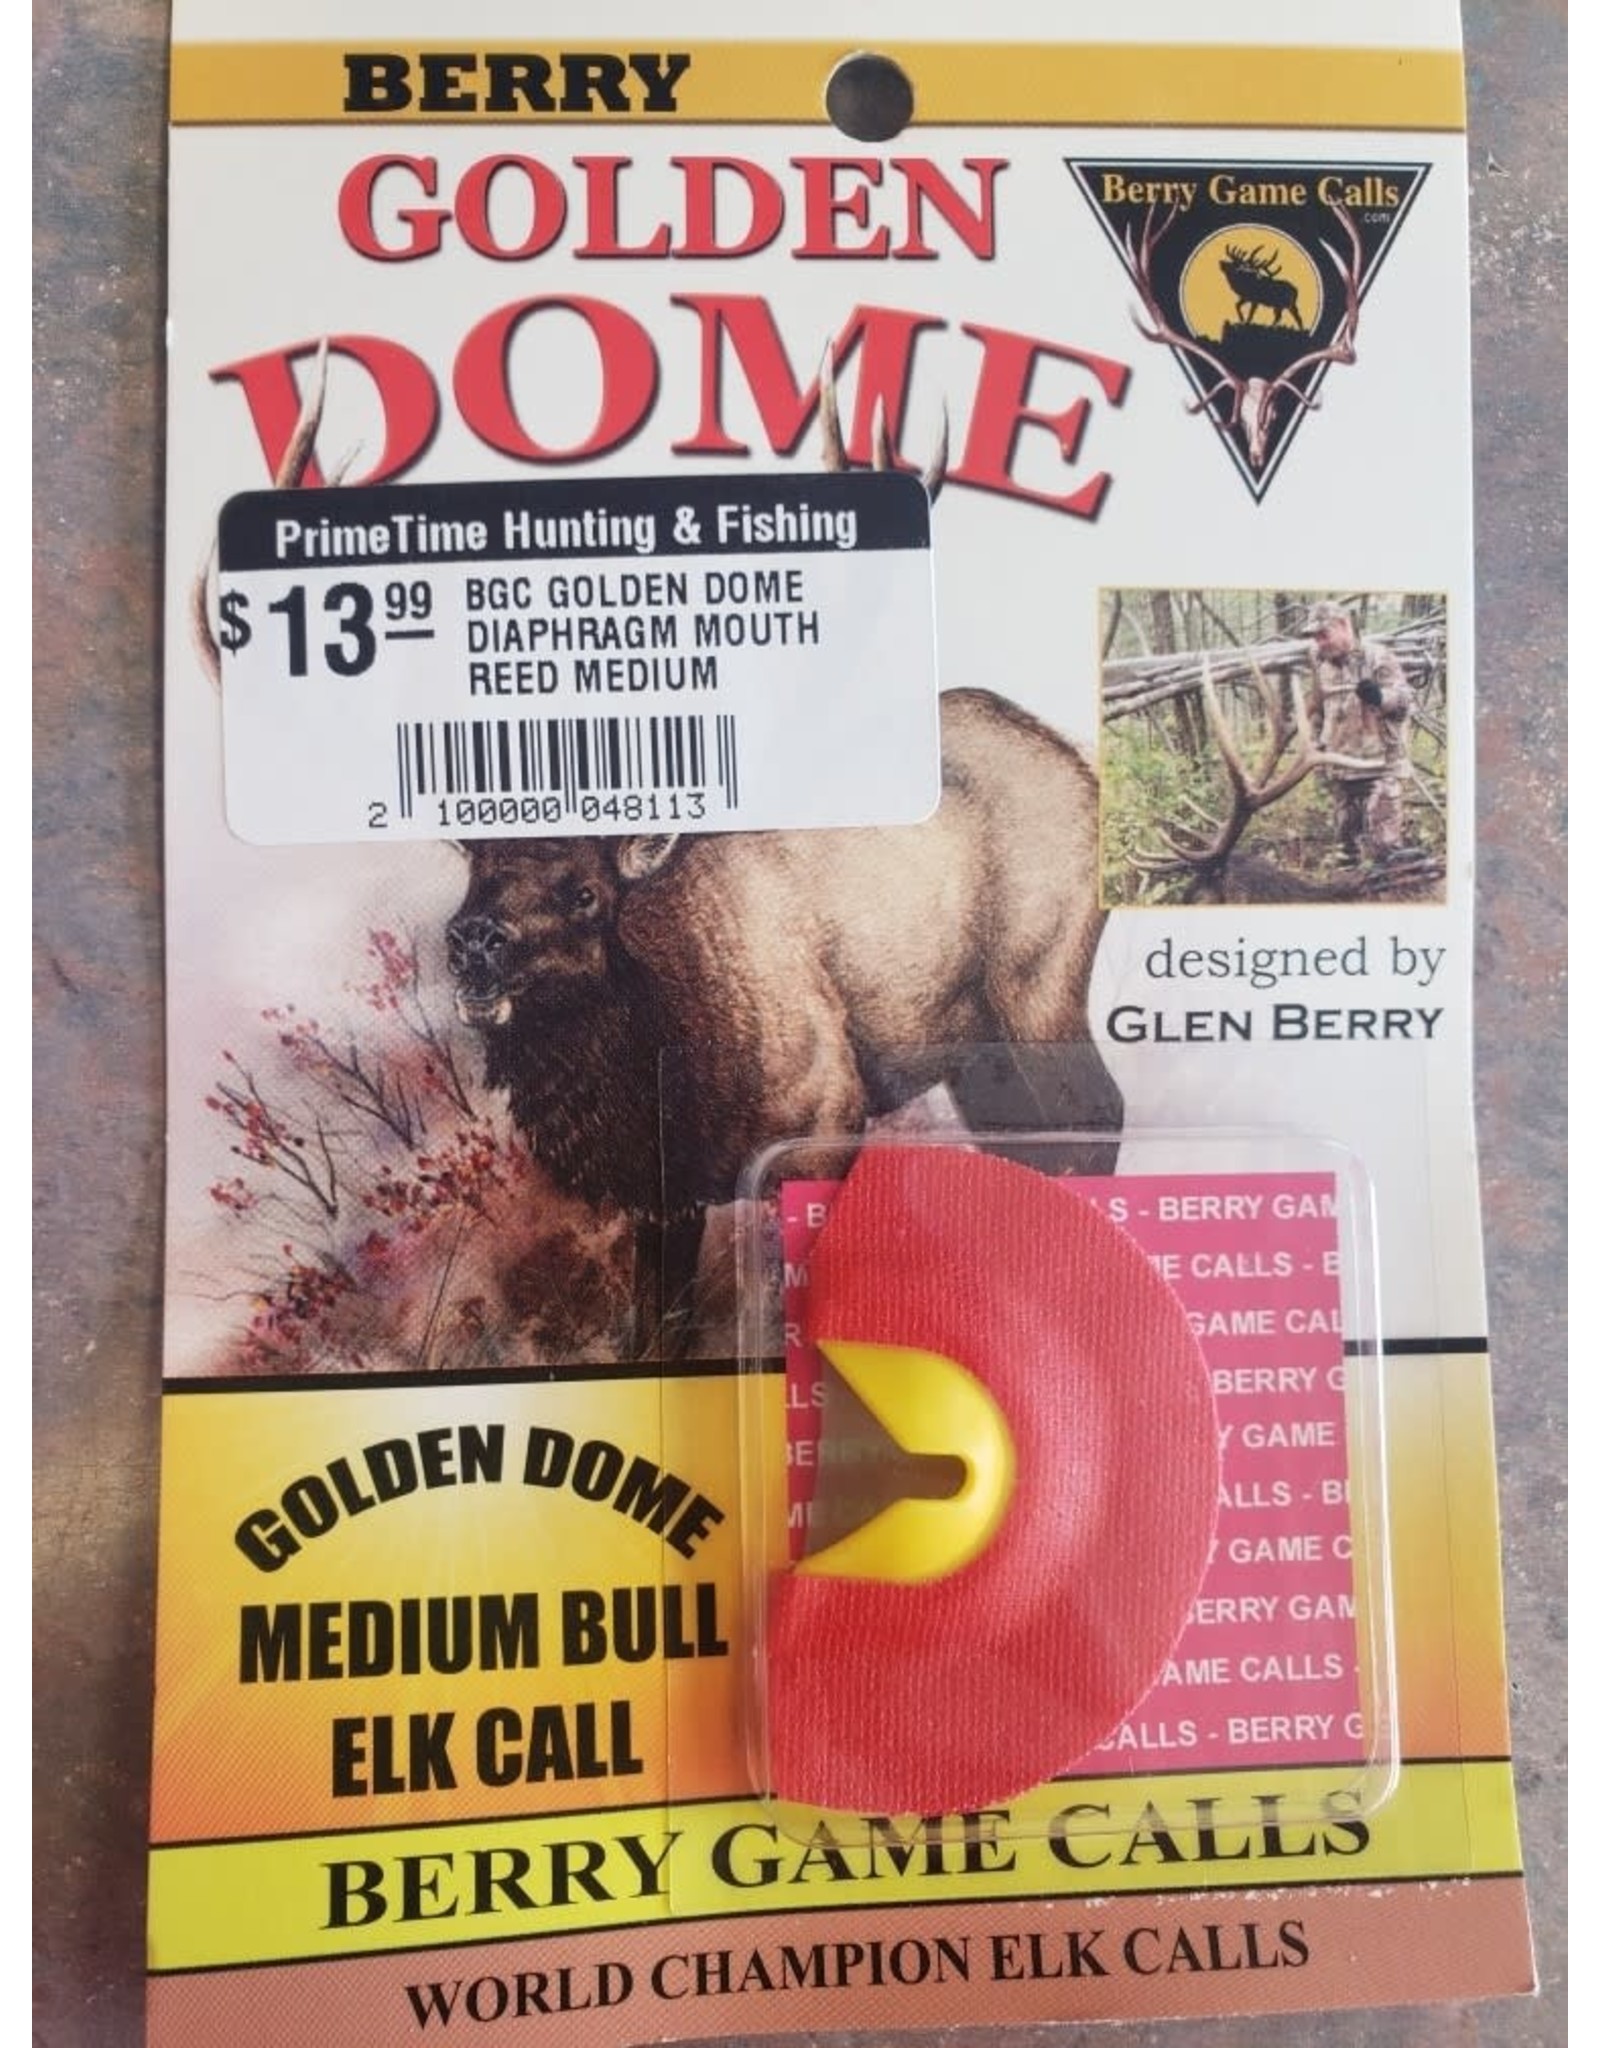 BERRY GAME CALLS BGC GOLDEN DOME DIAPHRAGM MOUTH REED